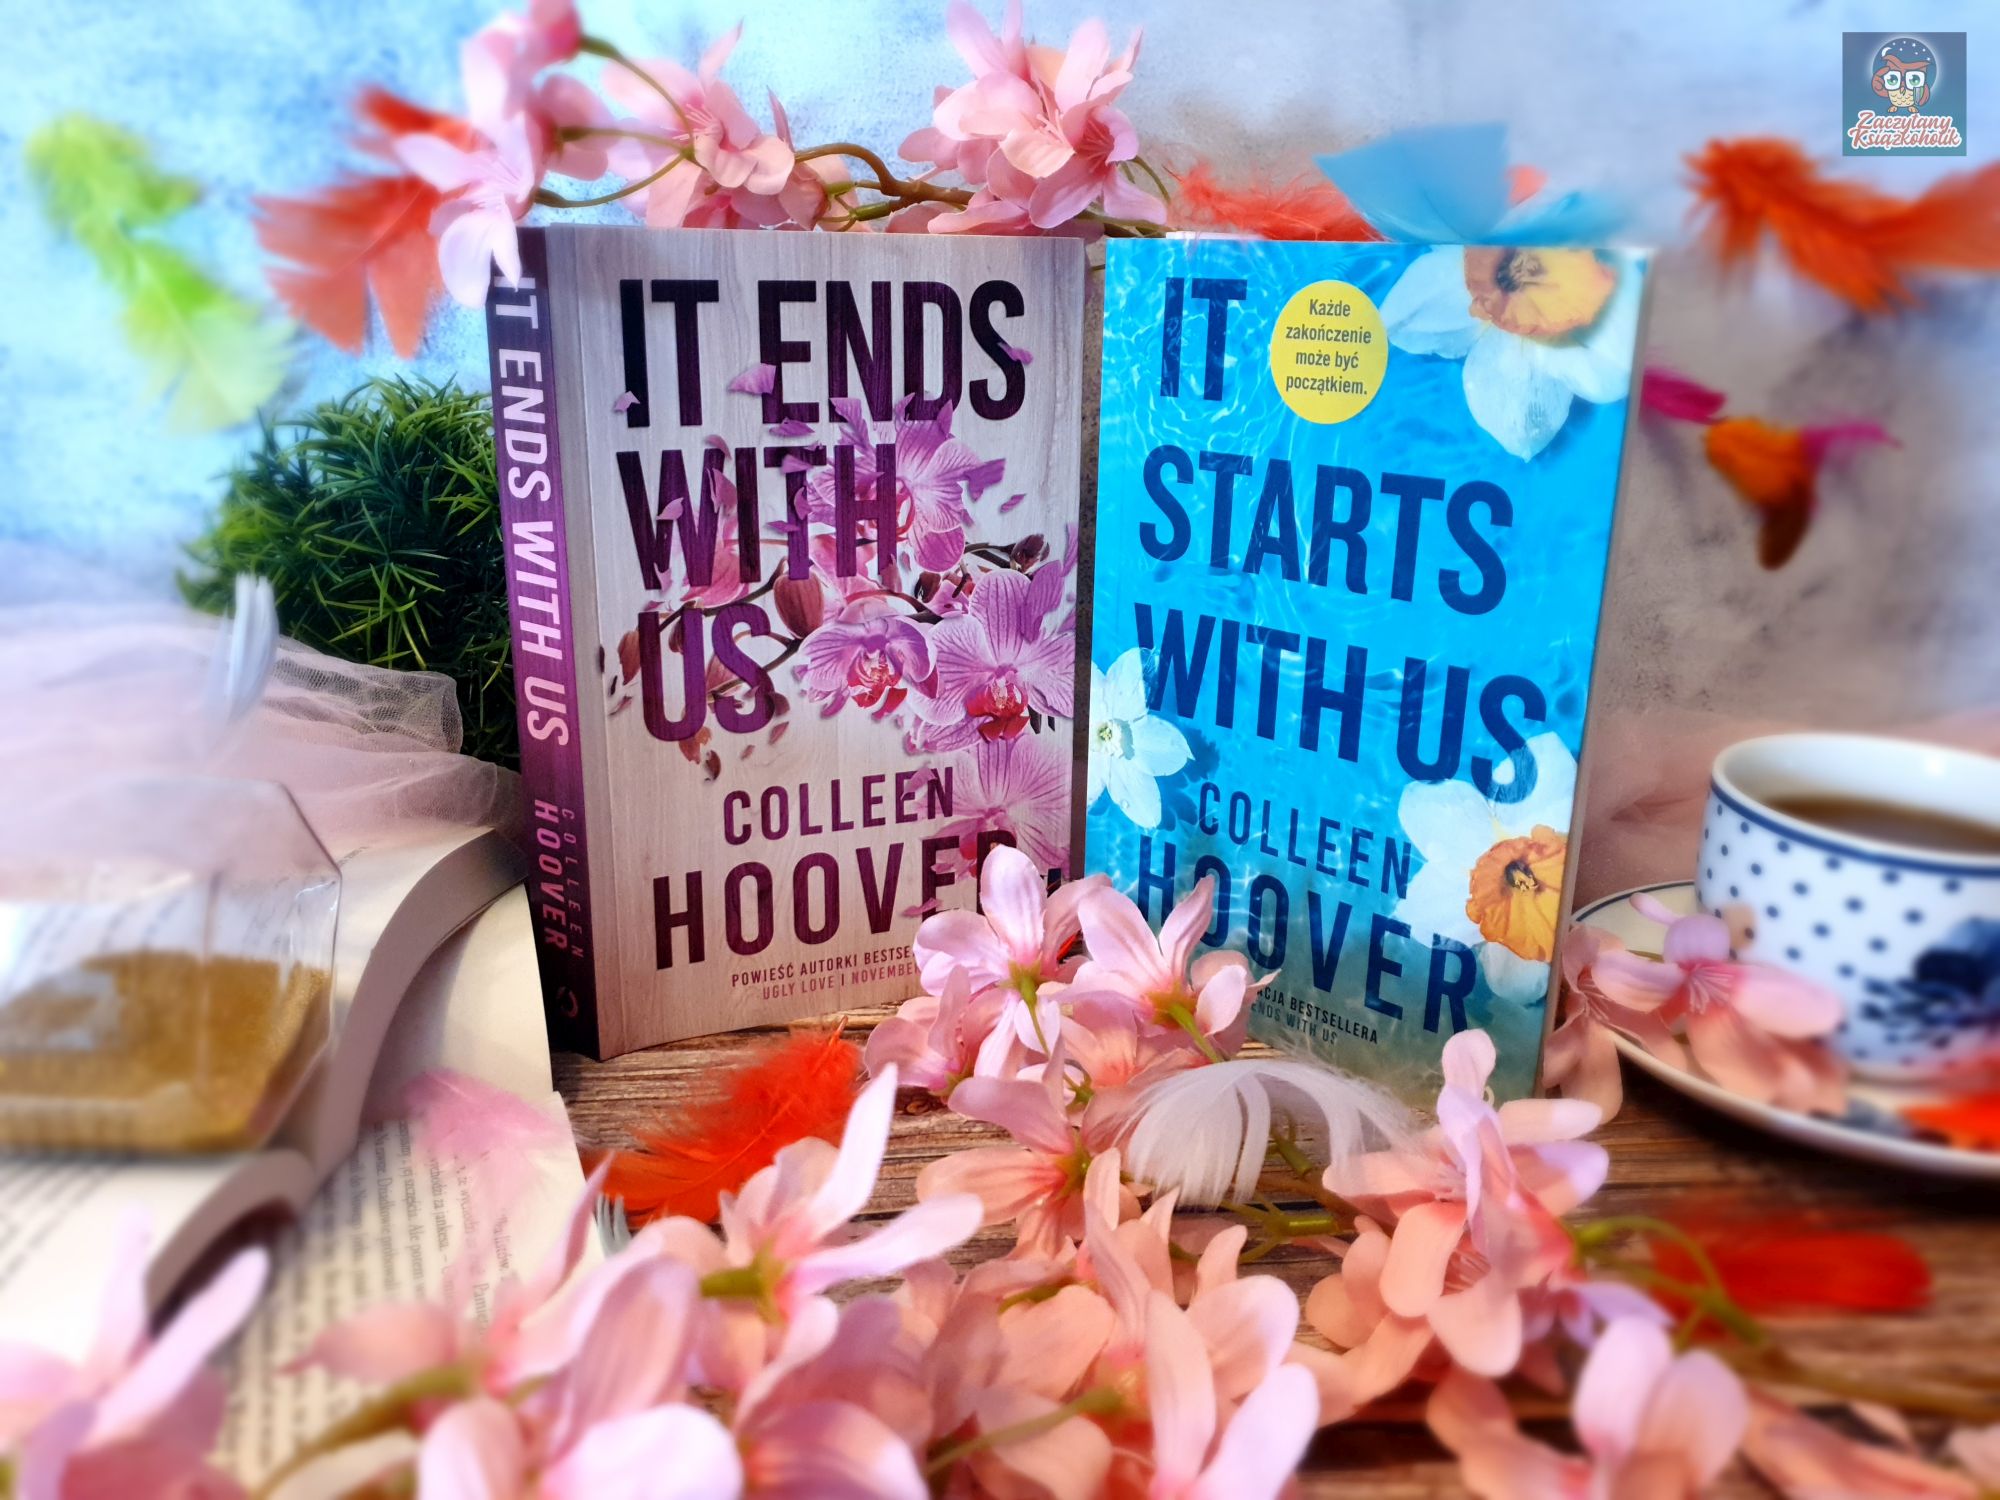 It Ends with Us - It Starts with Us - Colleen Hoover - zaczytanyksiazkoholik.pl - blog